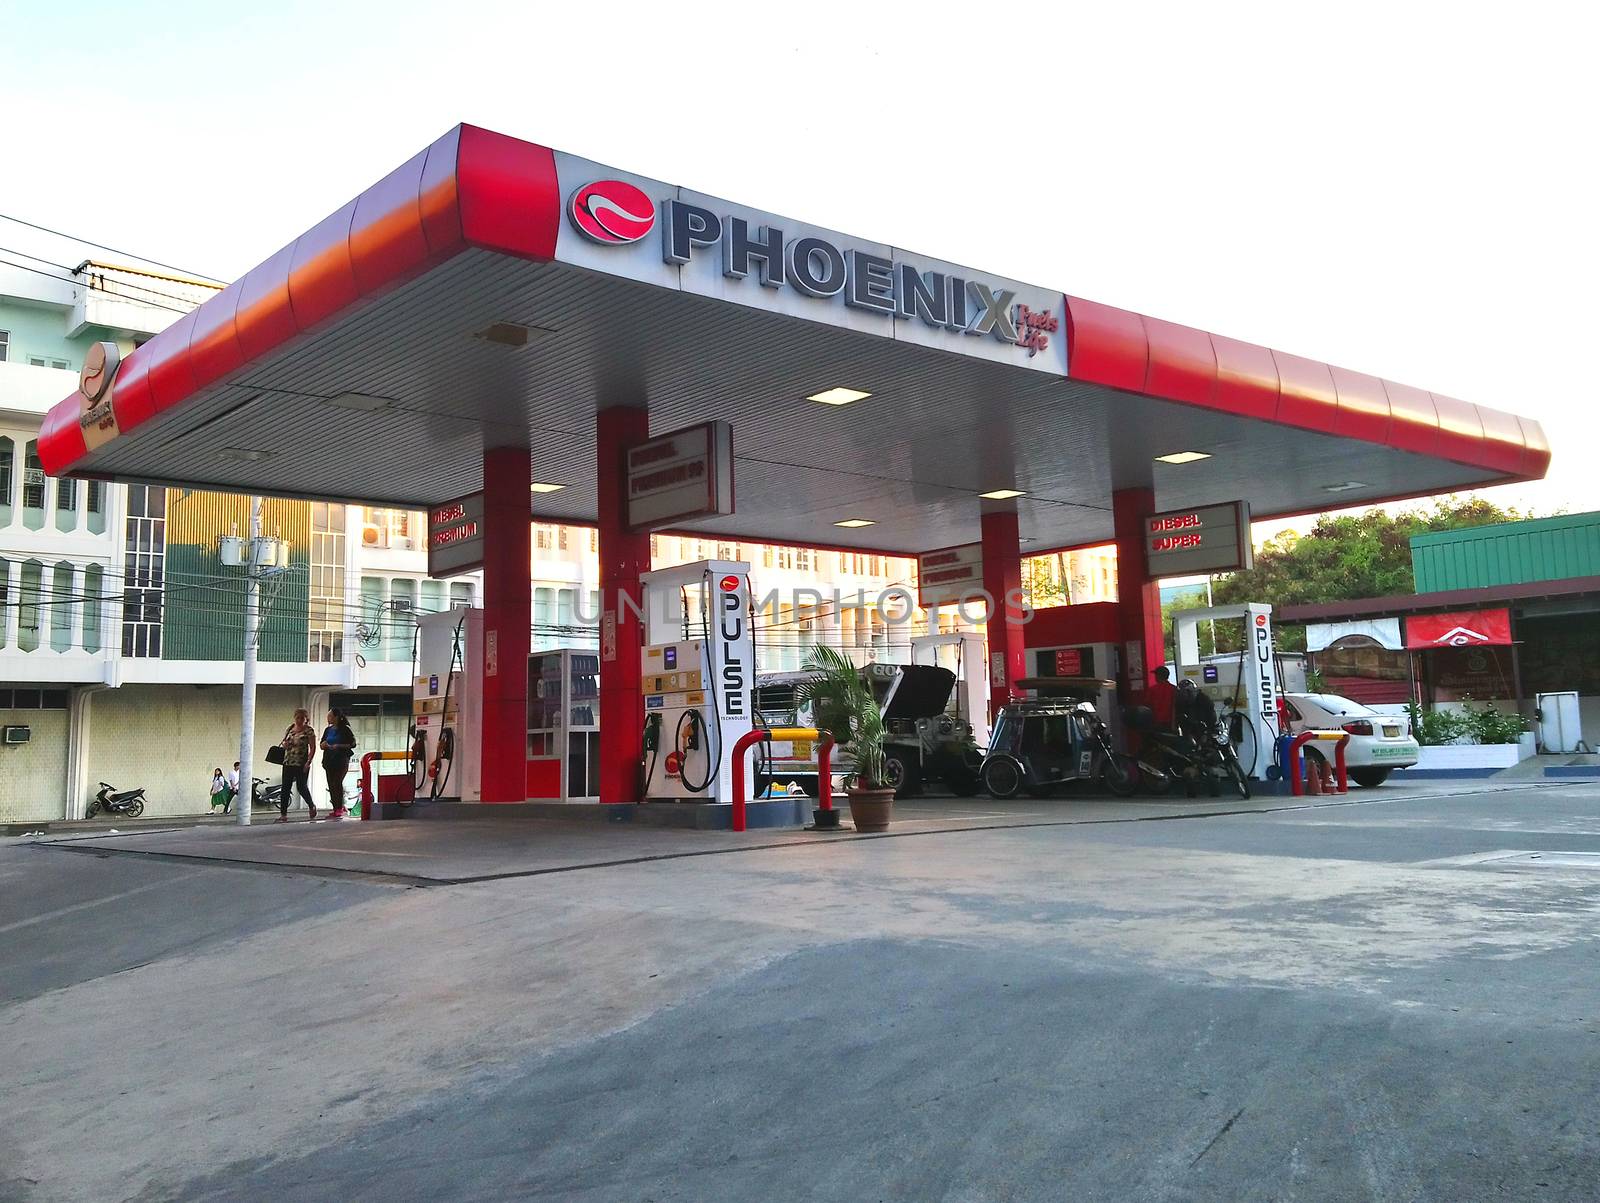 Phoenix gas station in Quezon City, Philippines by imwaltersy